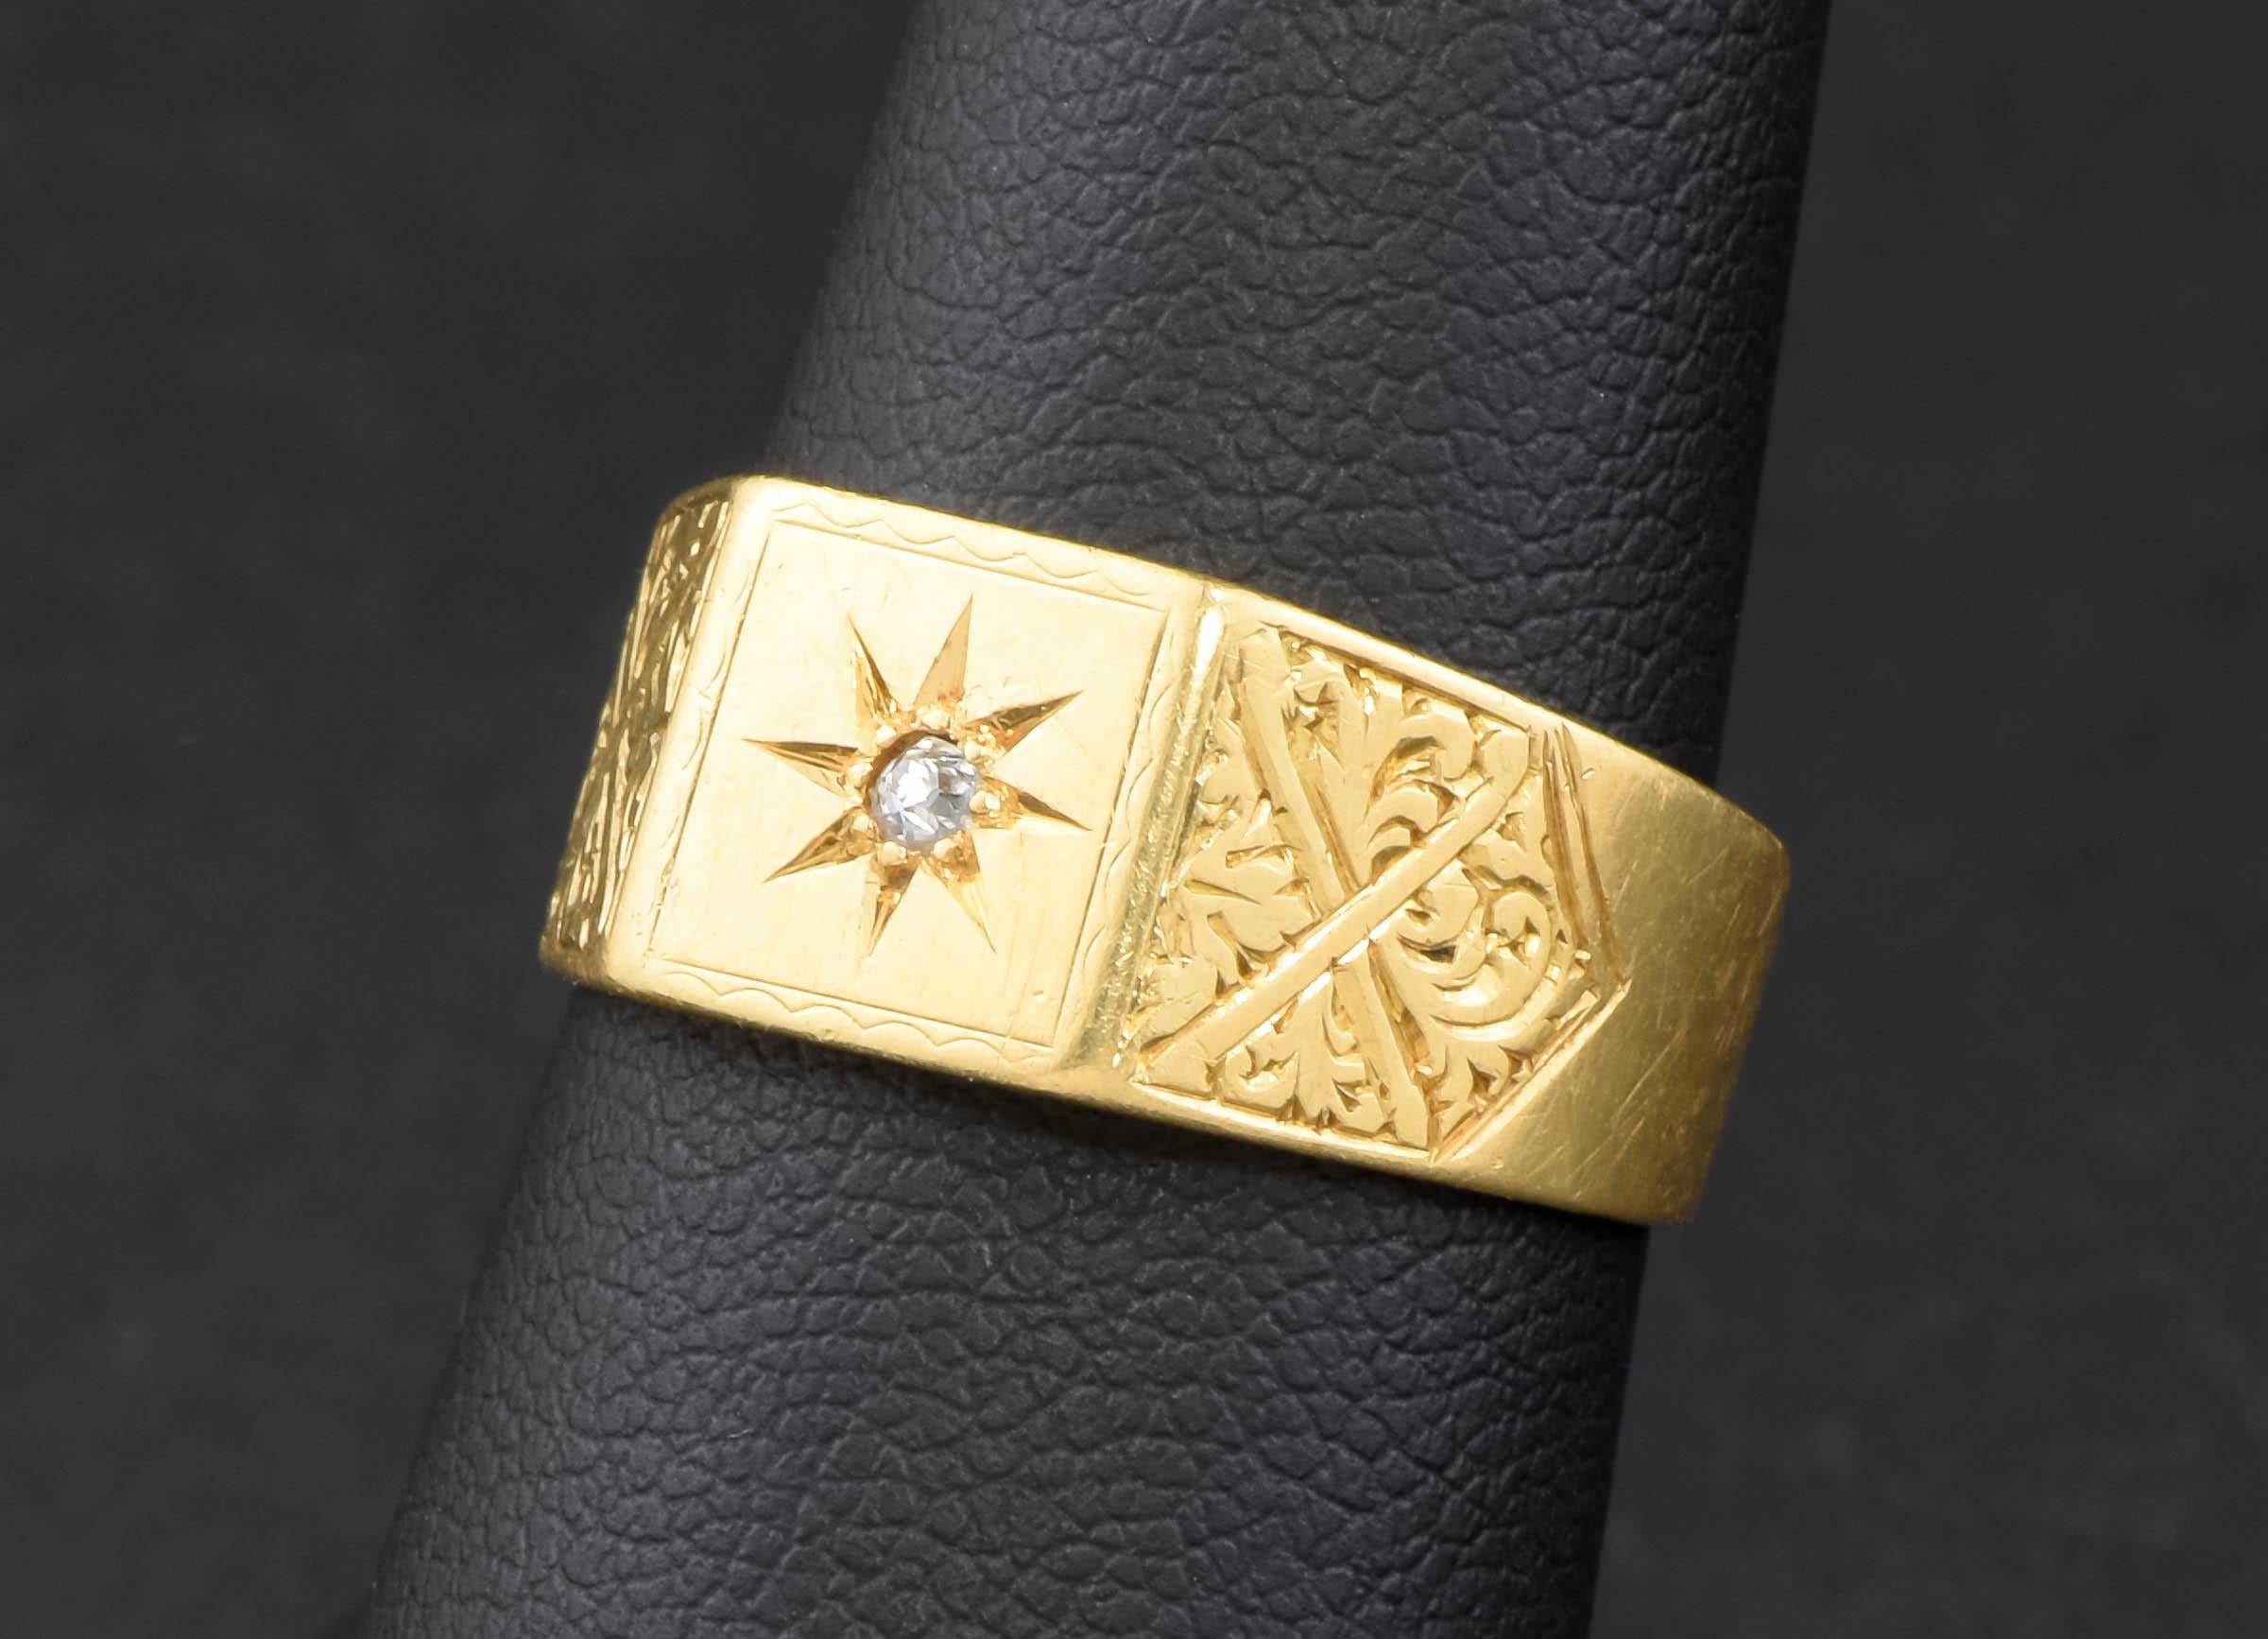 Victorian 18K Gold Diamond Star Signet Ring with Engraved Shoulders, hallmarked 1929